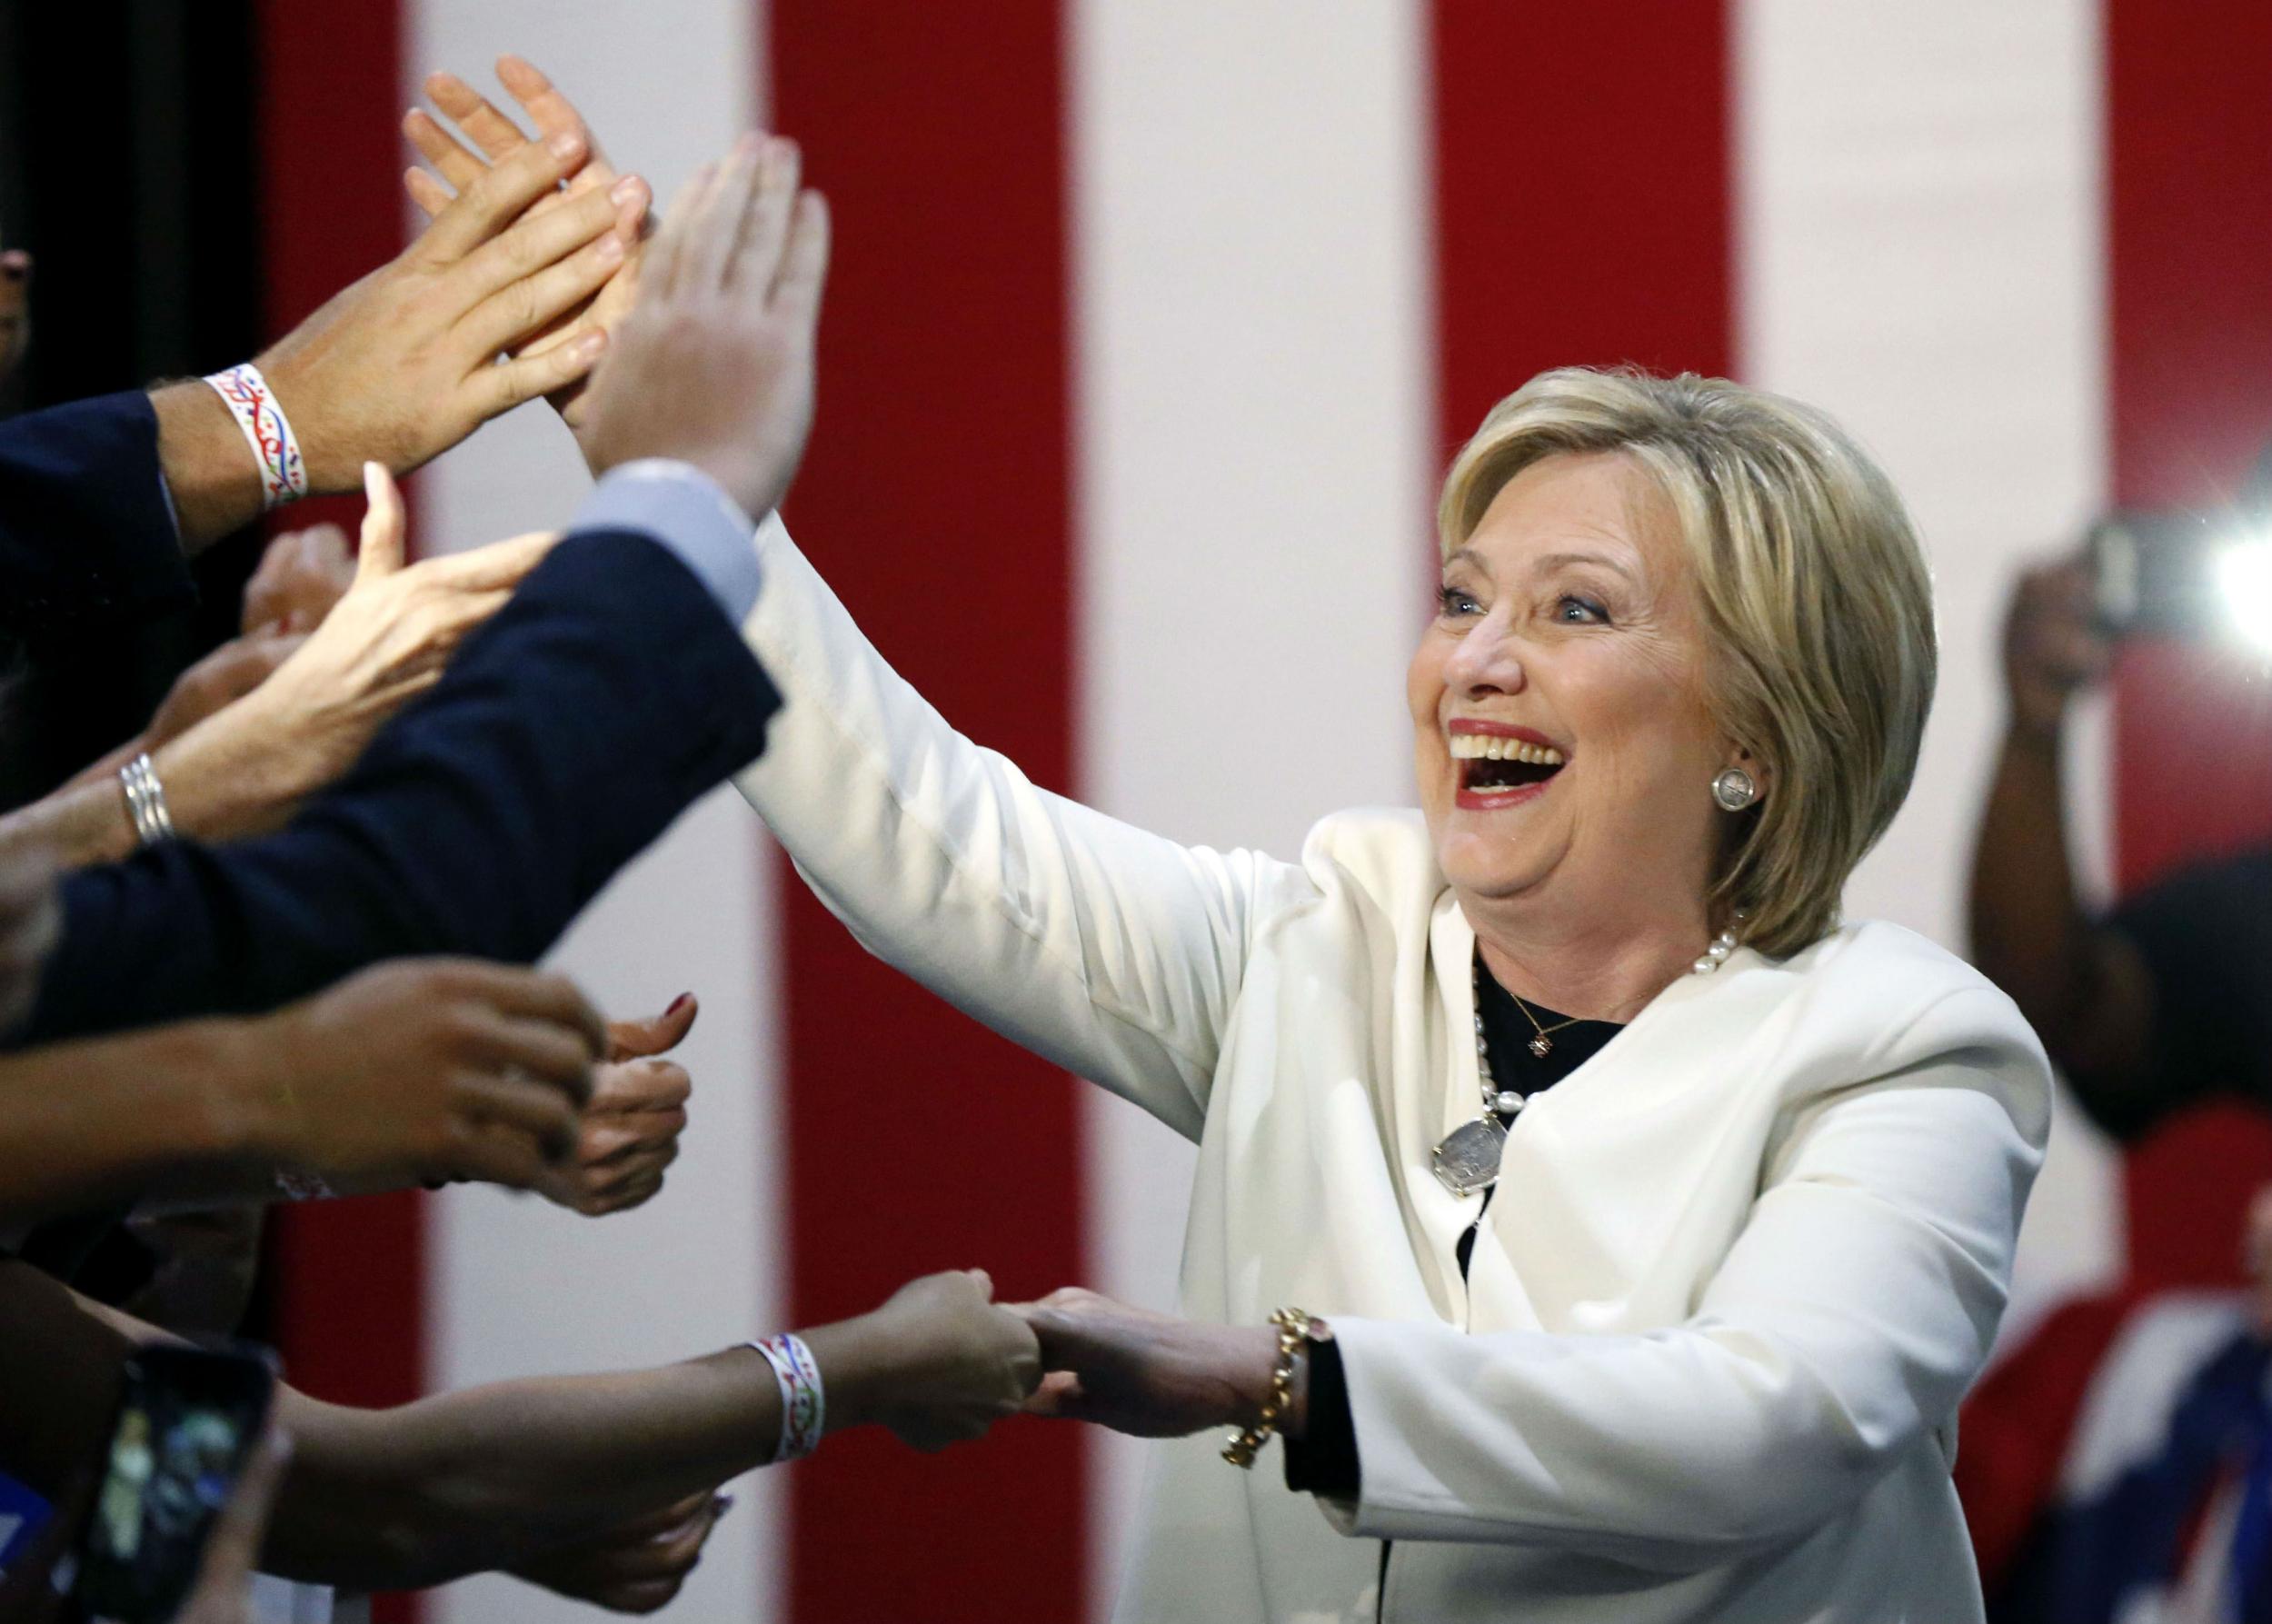 Hillary Clinton is setting her sights on the general election this November